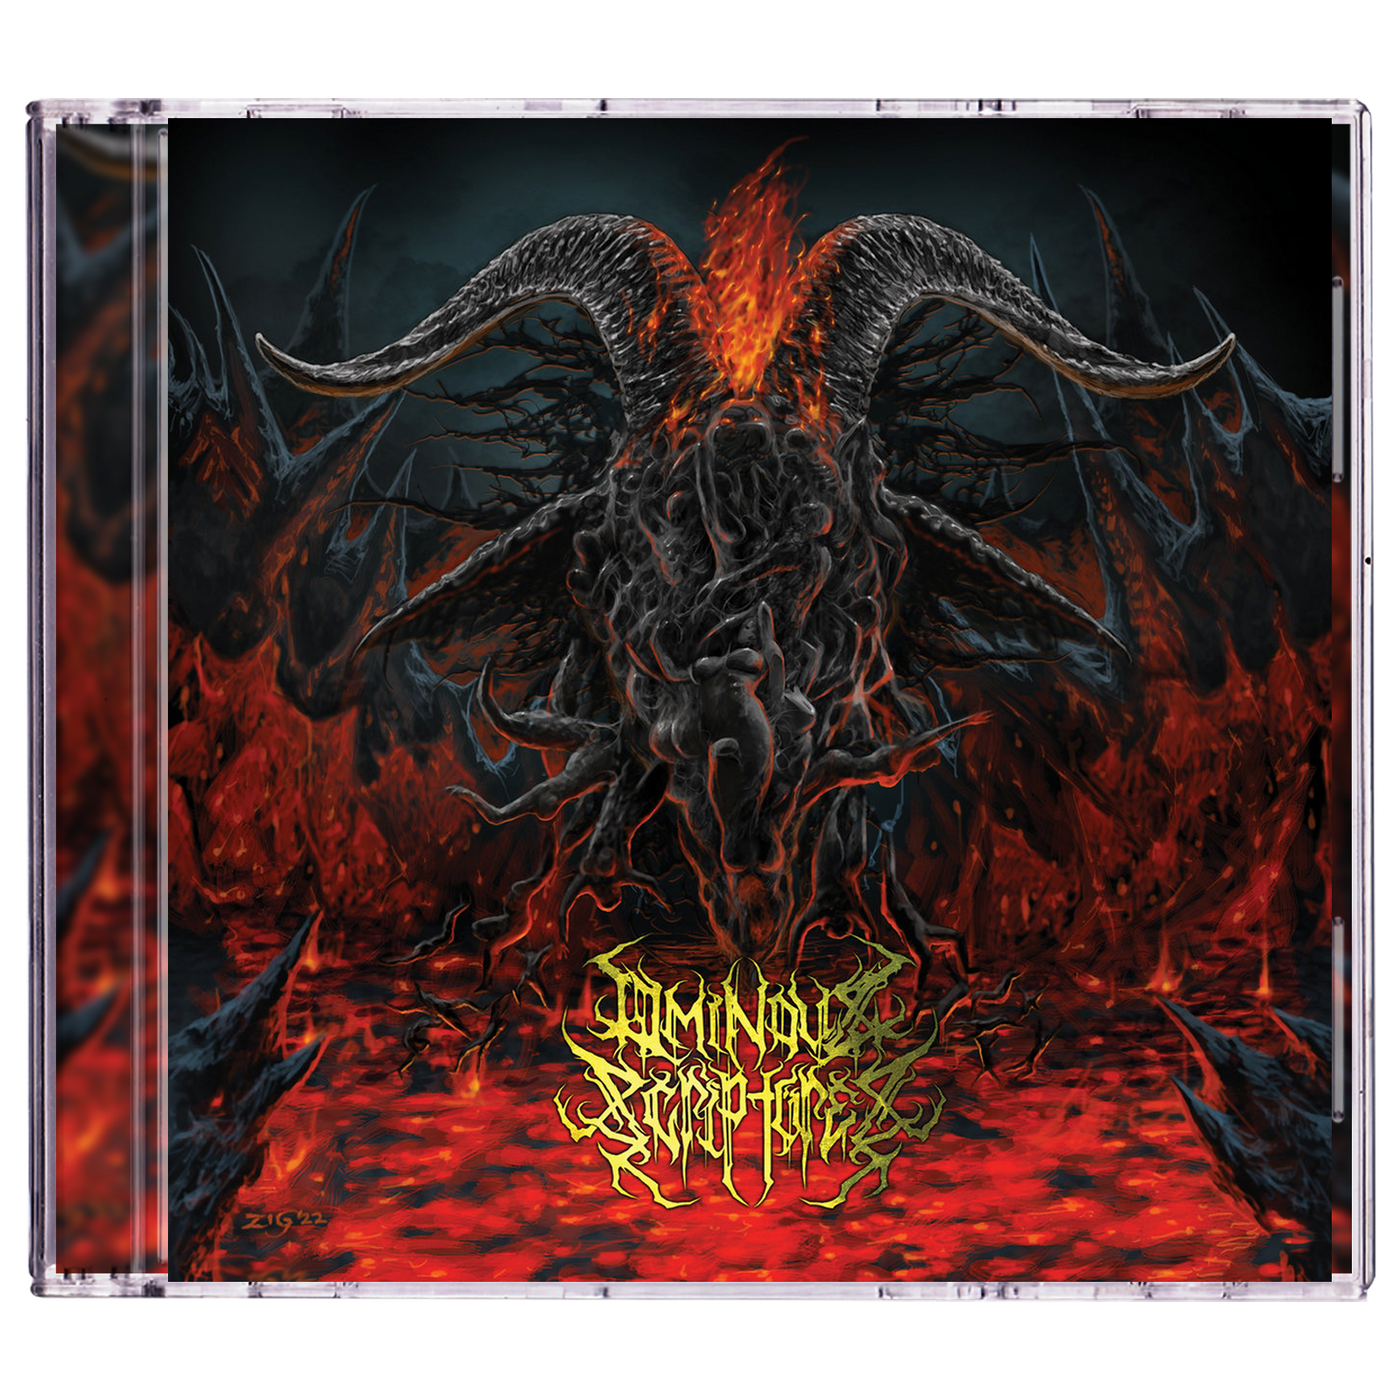 Ominous Scriptures 'Rituals Of Mass Self-Ignition' CD